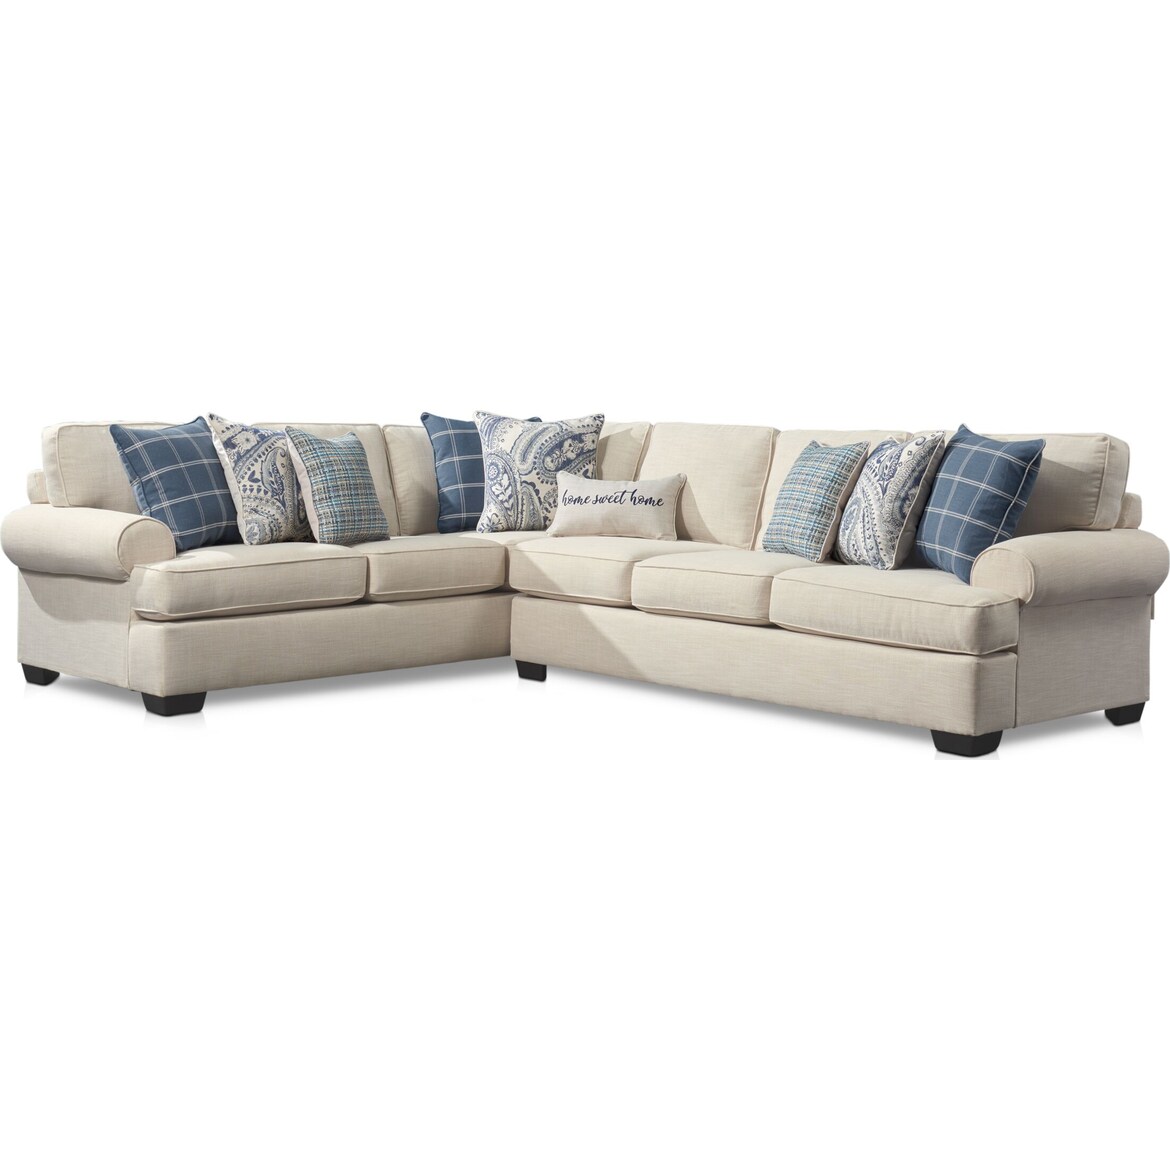 Riley 2-Piece Large Sectional - Linen | Value City Furniture and Mattresses